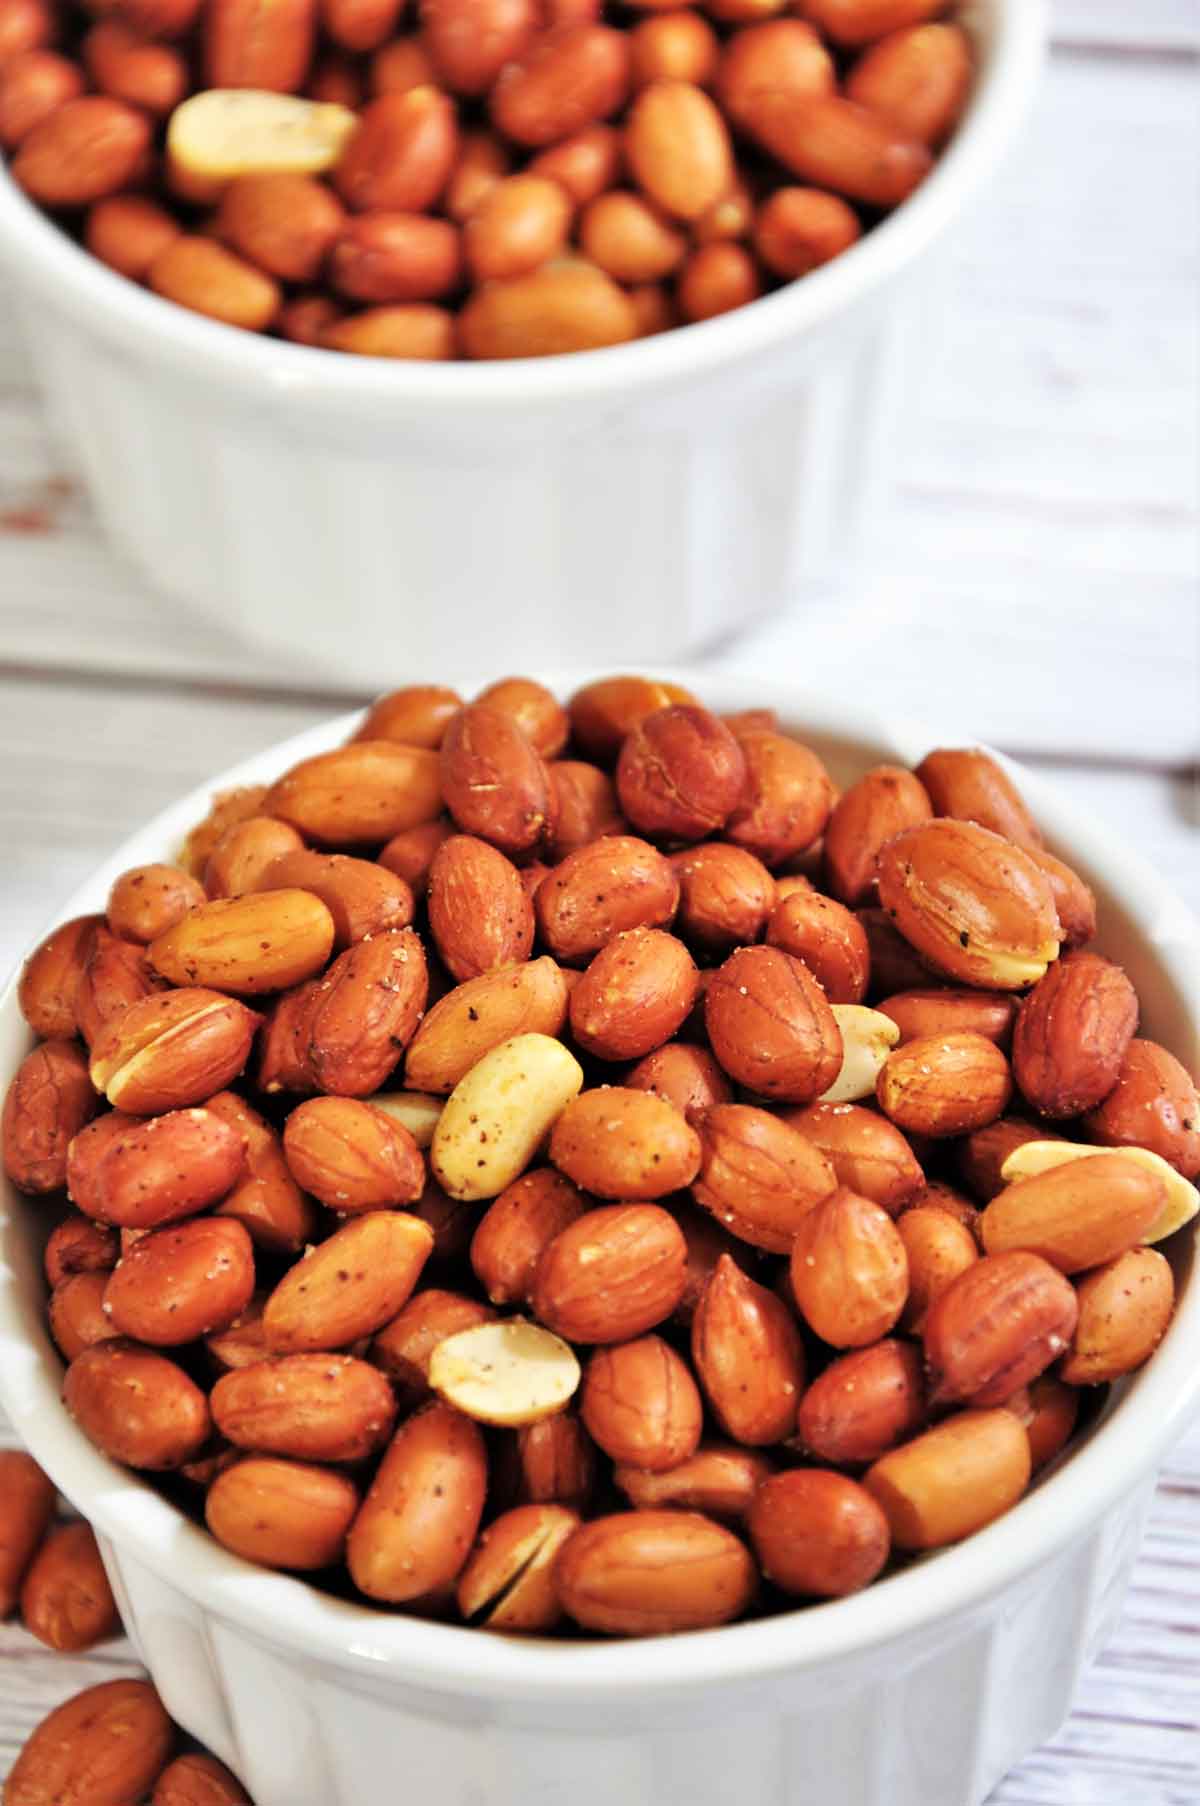 Roasted peanuts in a bowl.